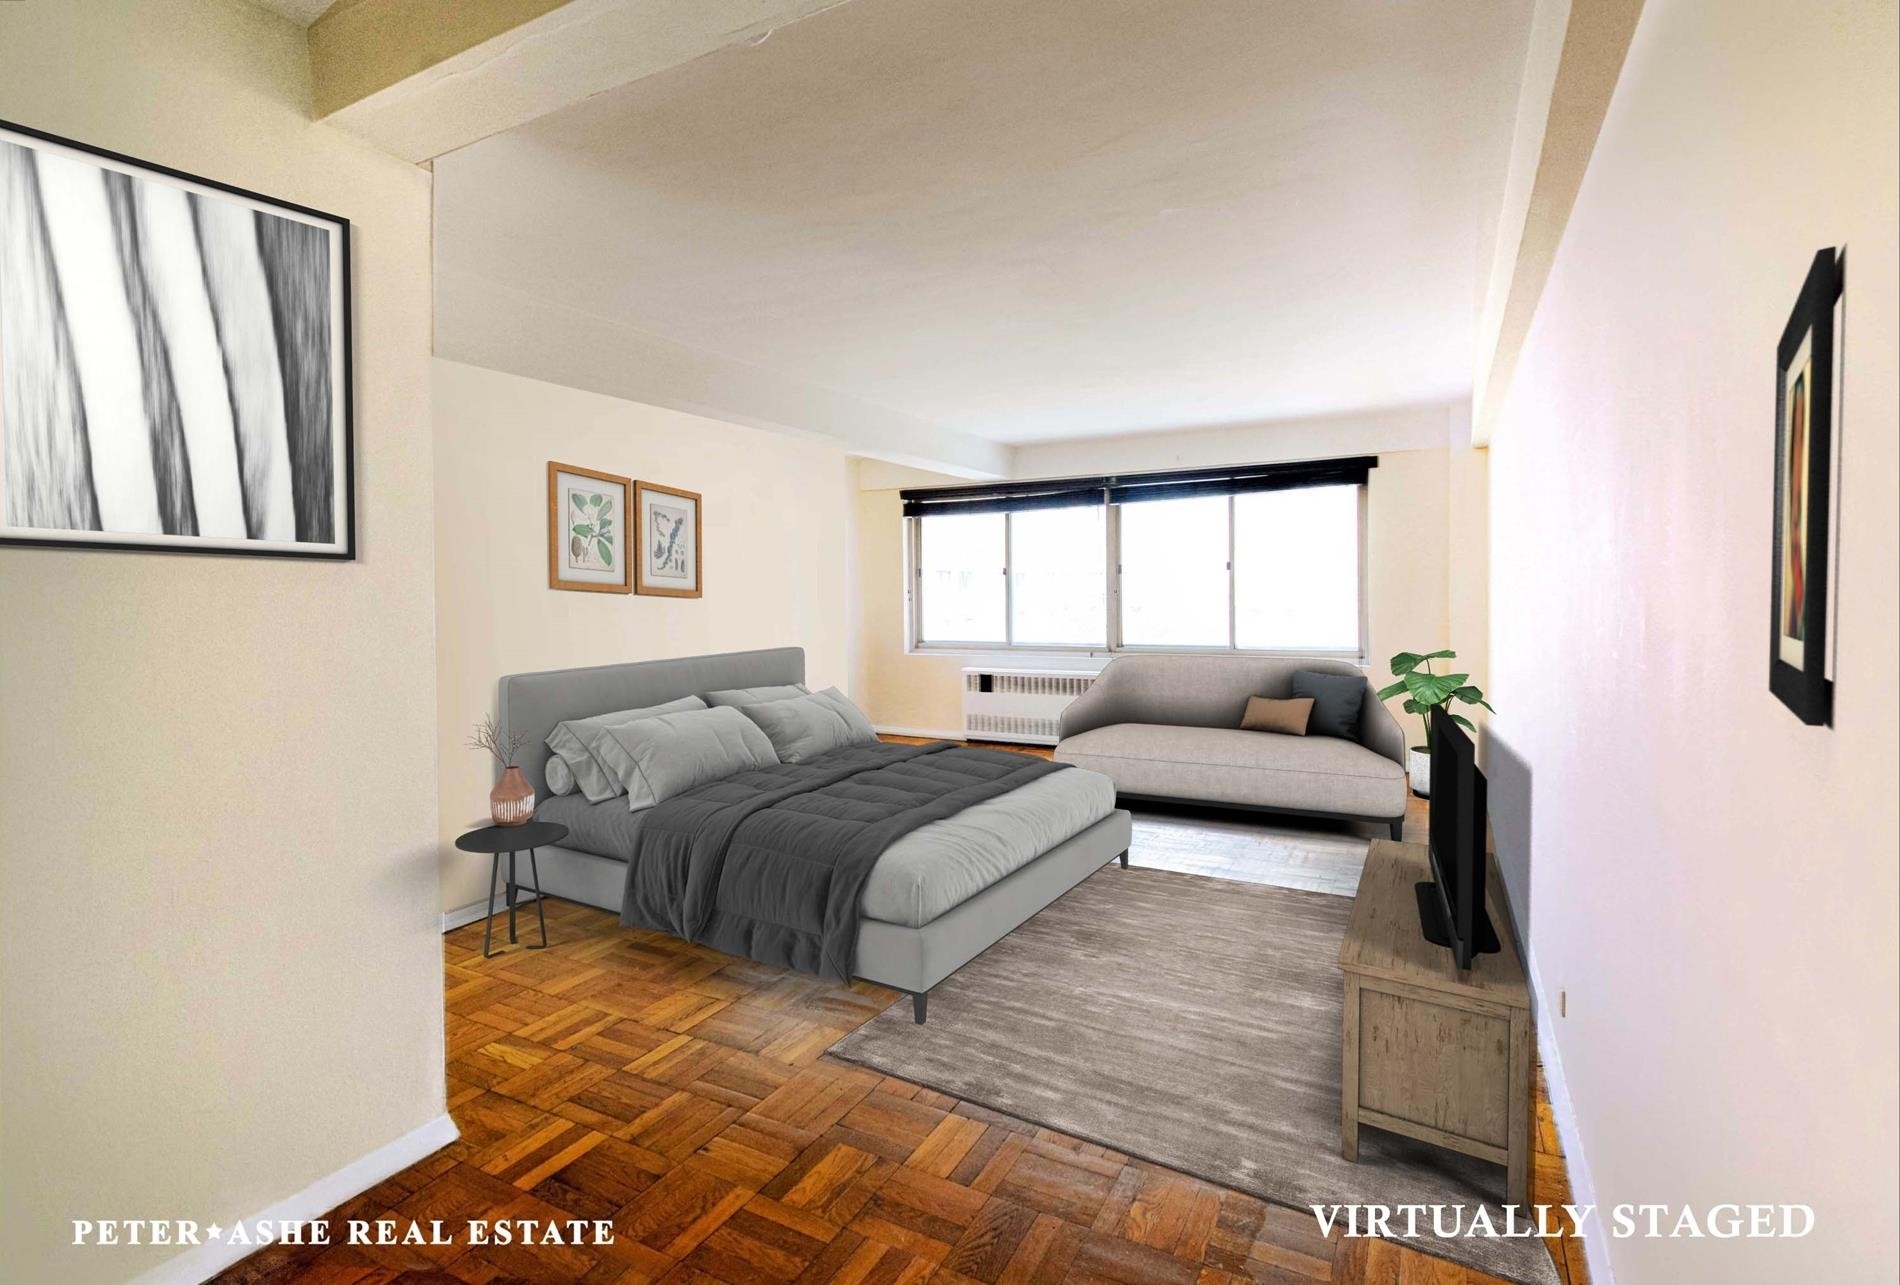 Property at Executive House, 225 E 46TH ST, 9B Turtle Bay, New York, New York 10017